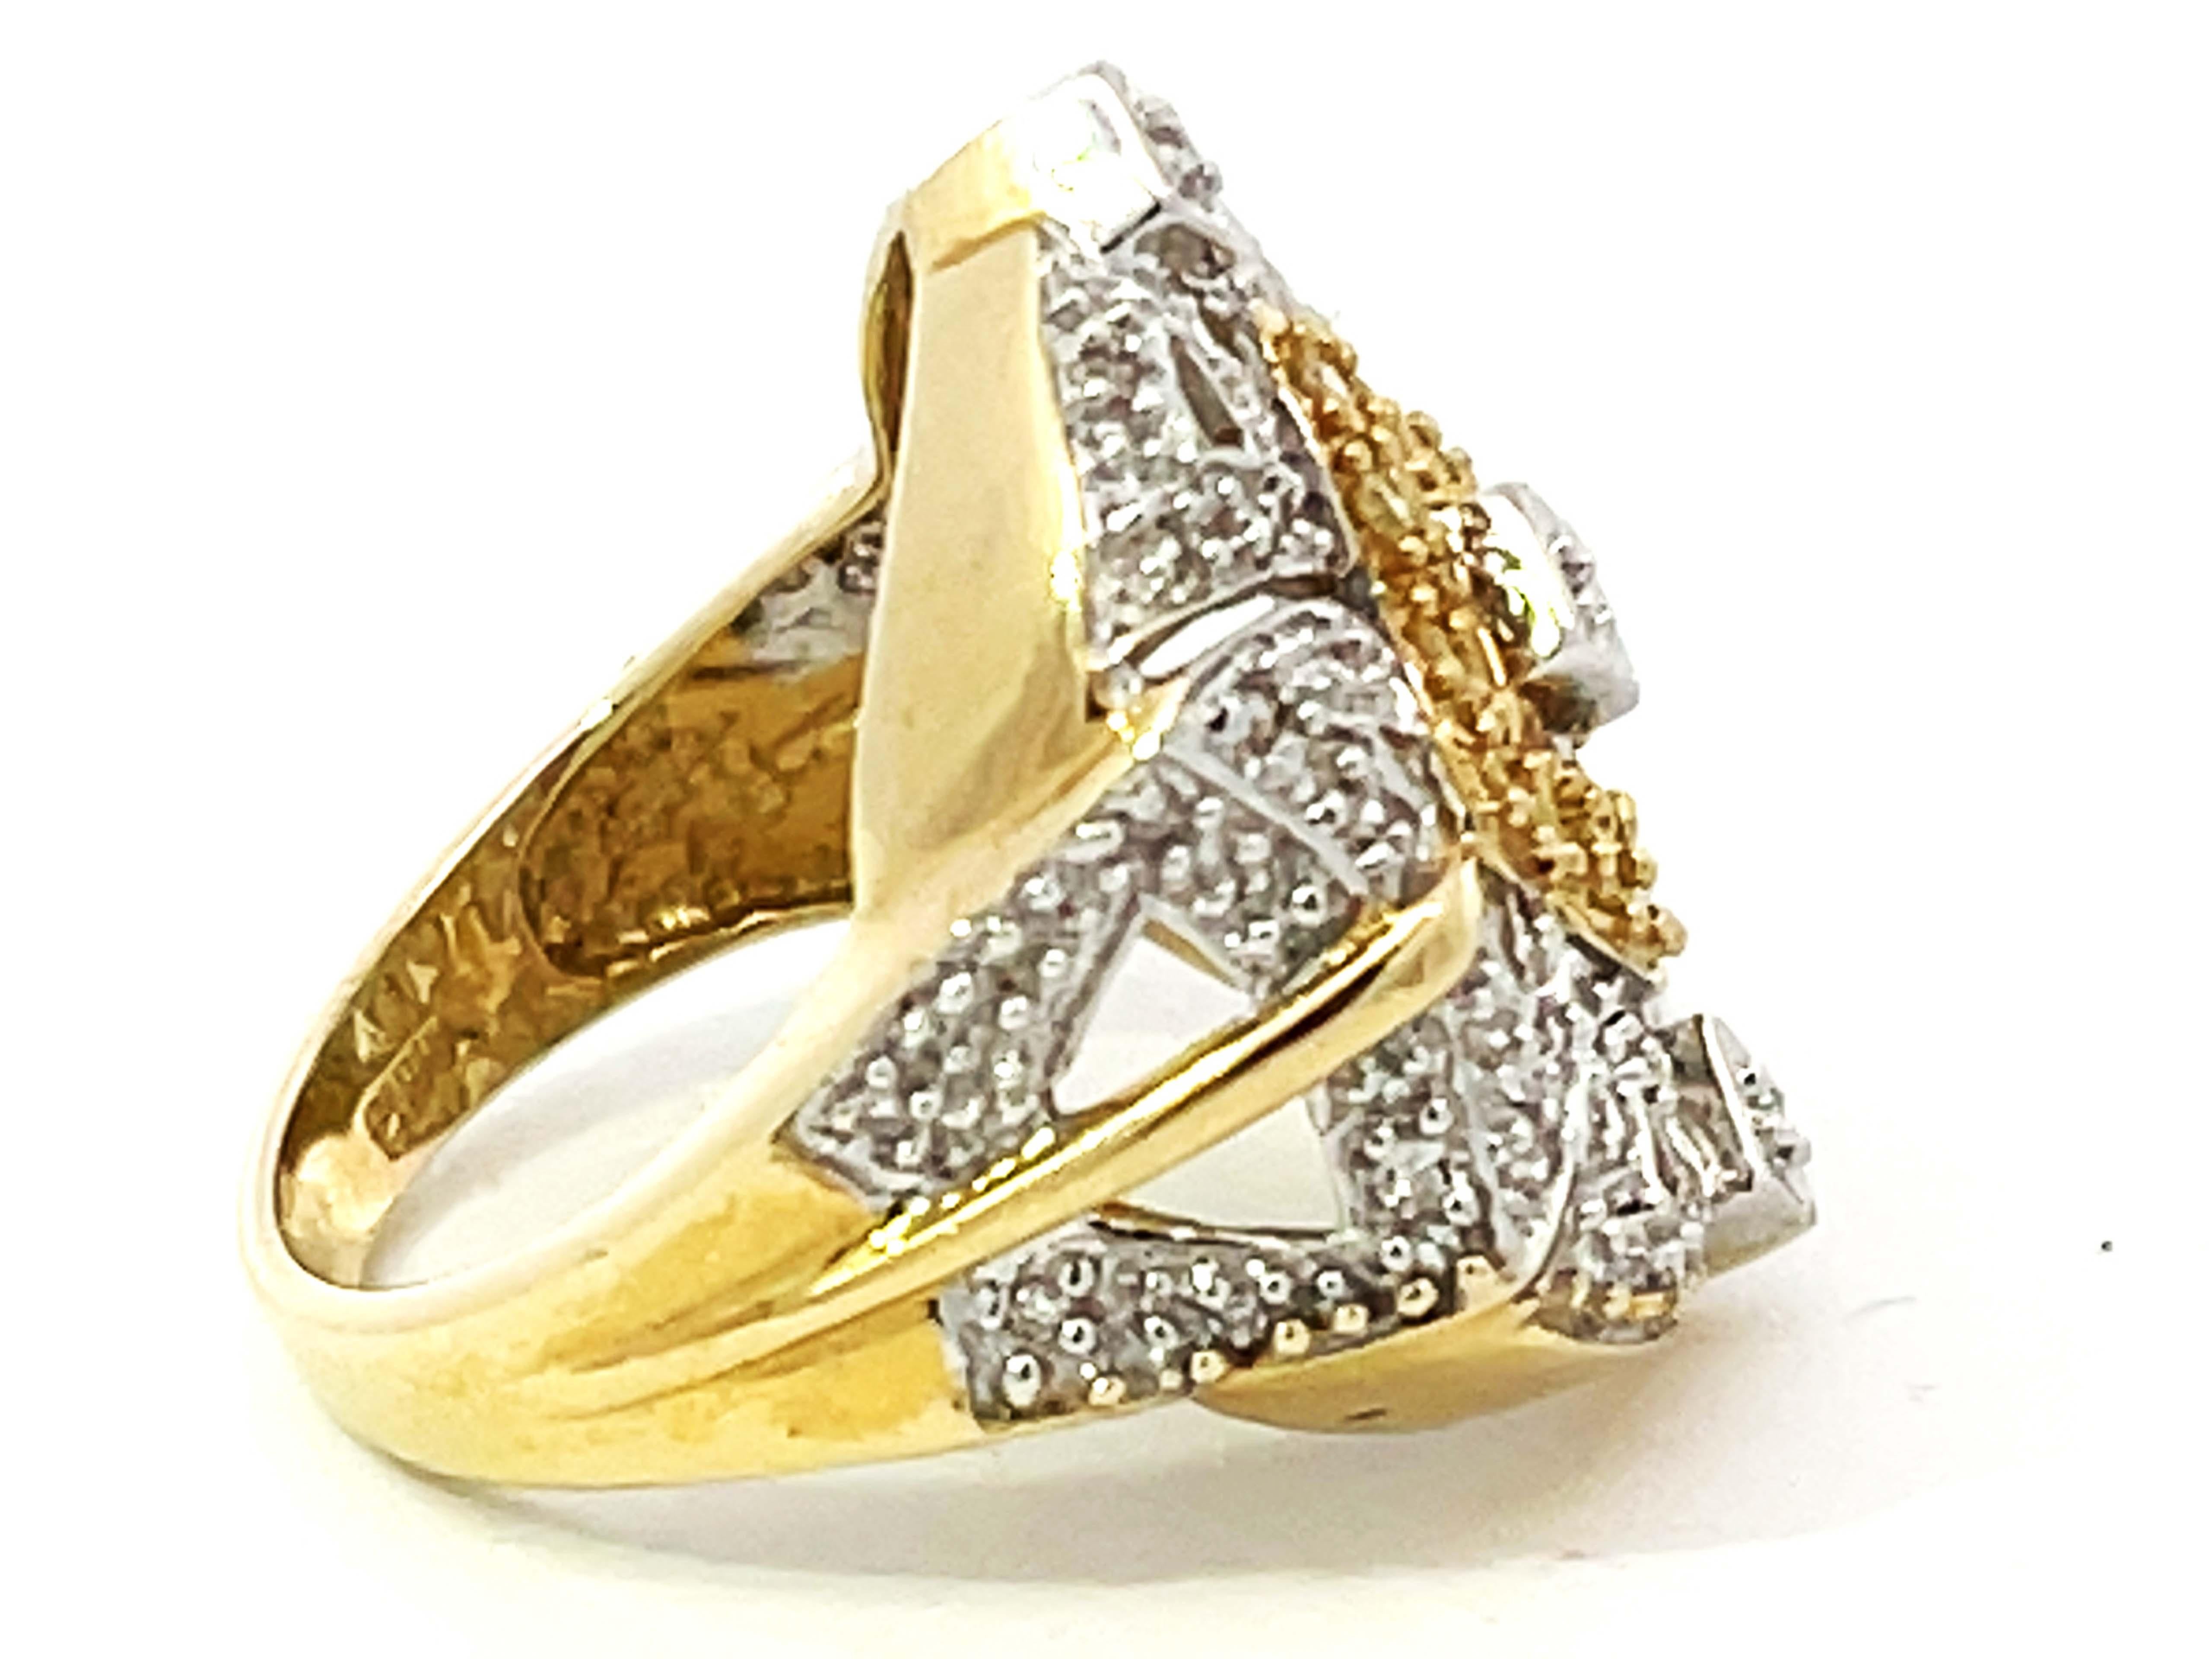 White and Yellow Diamond Geometric Design Ring in 14k Yellow Gold In Excellent Condition For Sale In Honolulu, HI